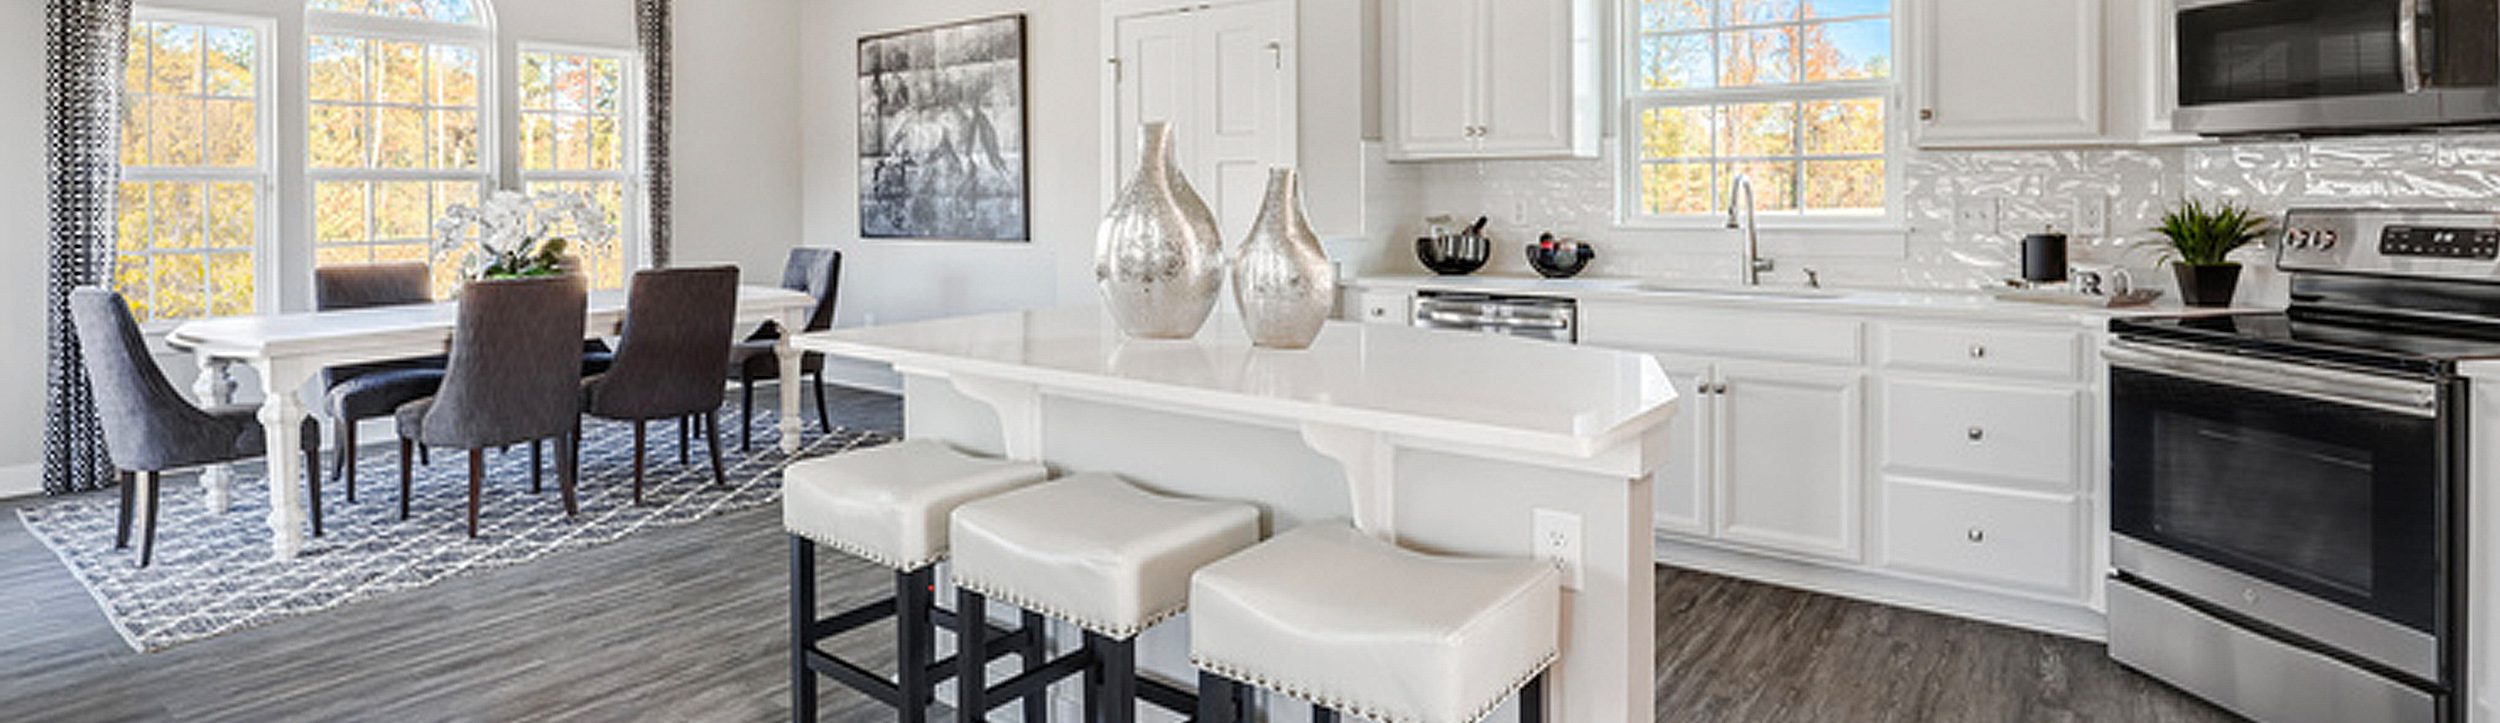 ryanhomes_robertfrost_featured